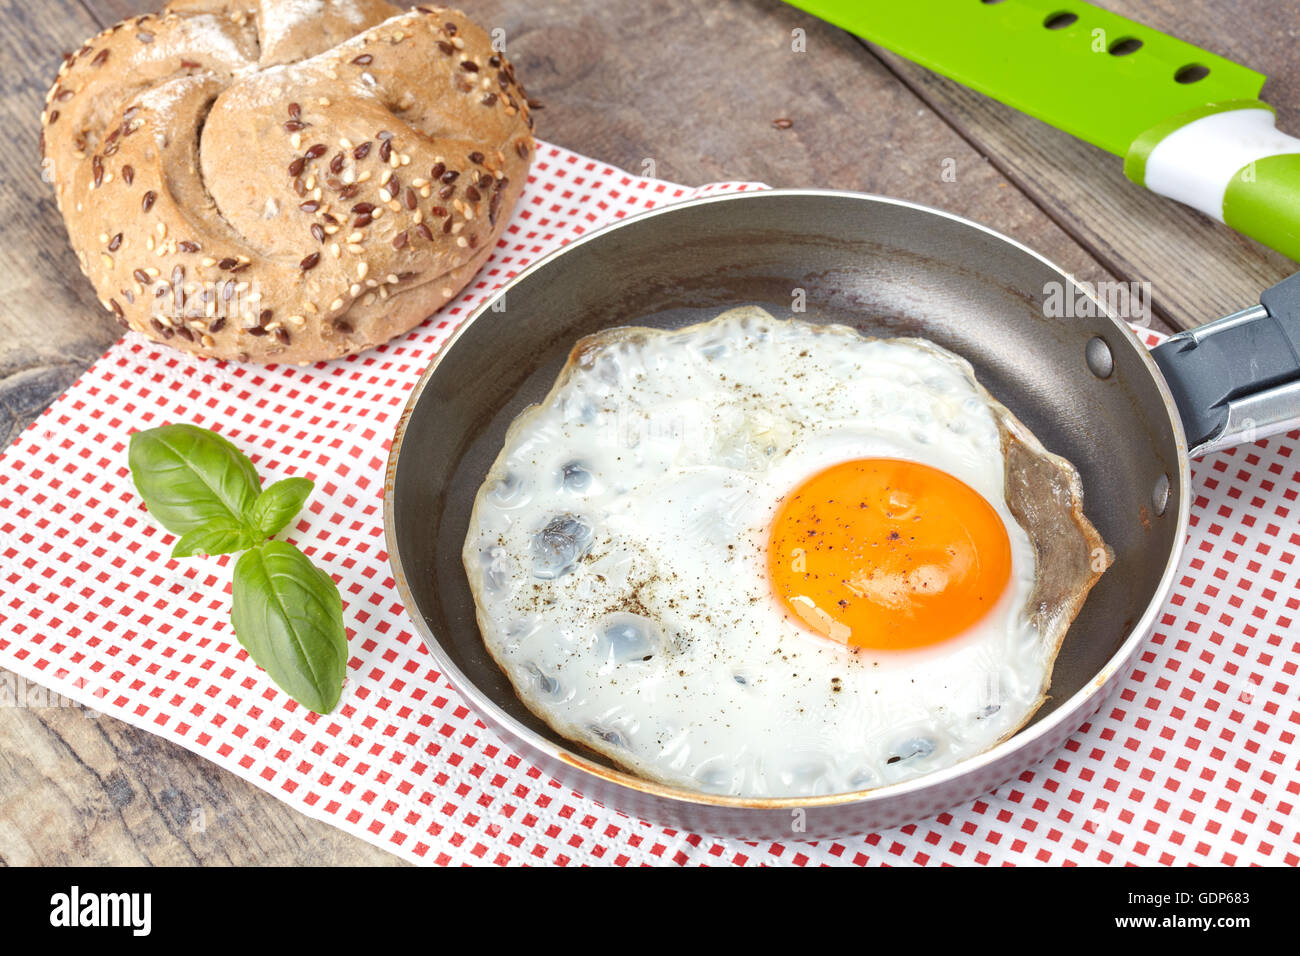 Fried egg in a pan with full grain roll. Stock Photo